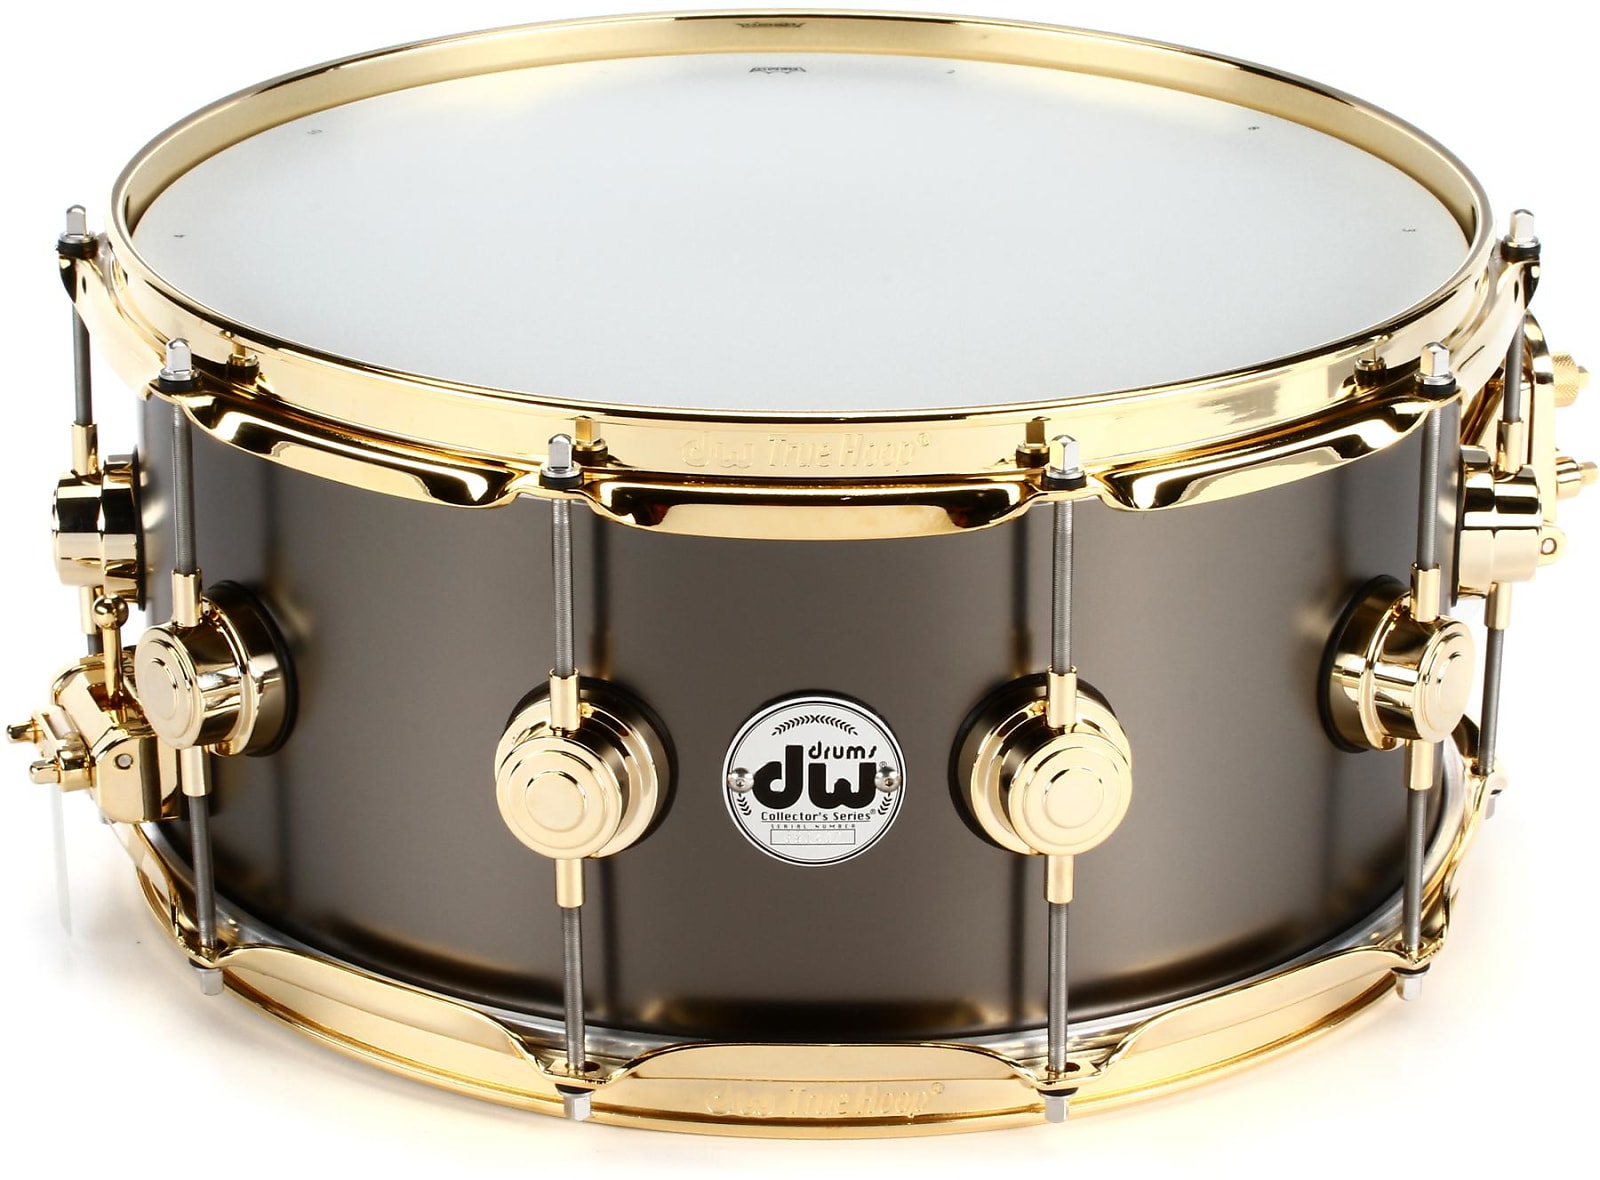 DW Collector's Series Metal Snare Drum - 6.5-inch x 14-inch - Satin Black Over Brass - Gold Hardware image 1